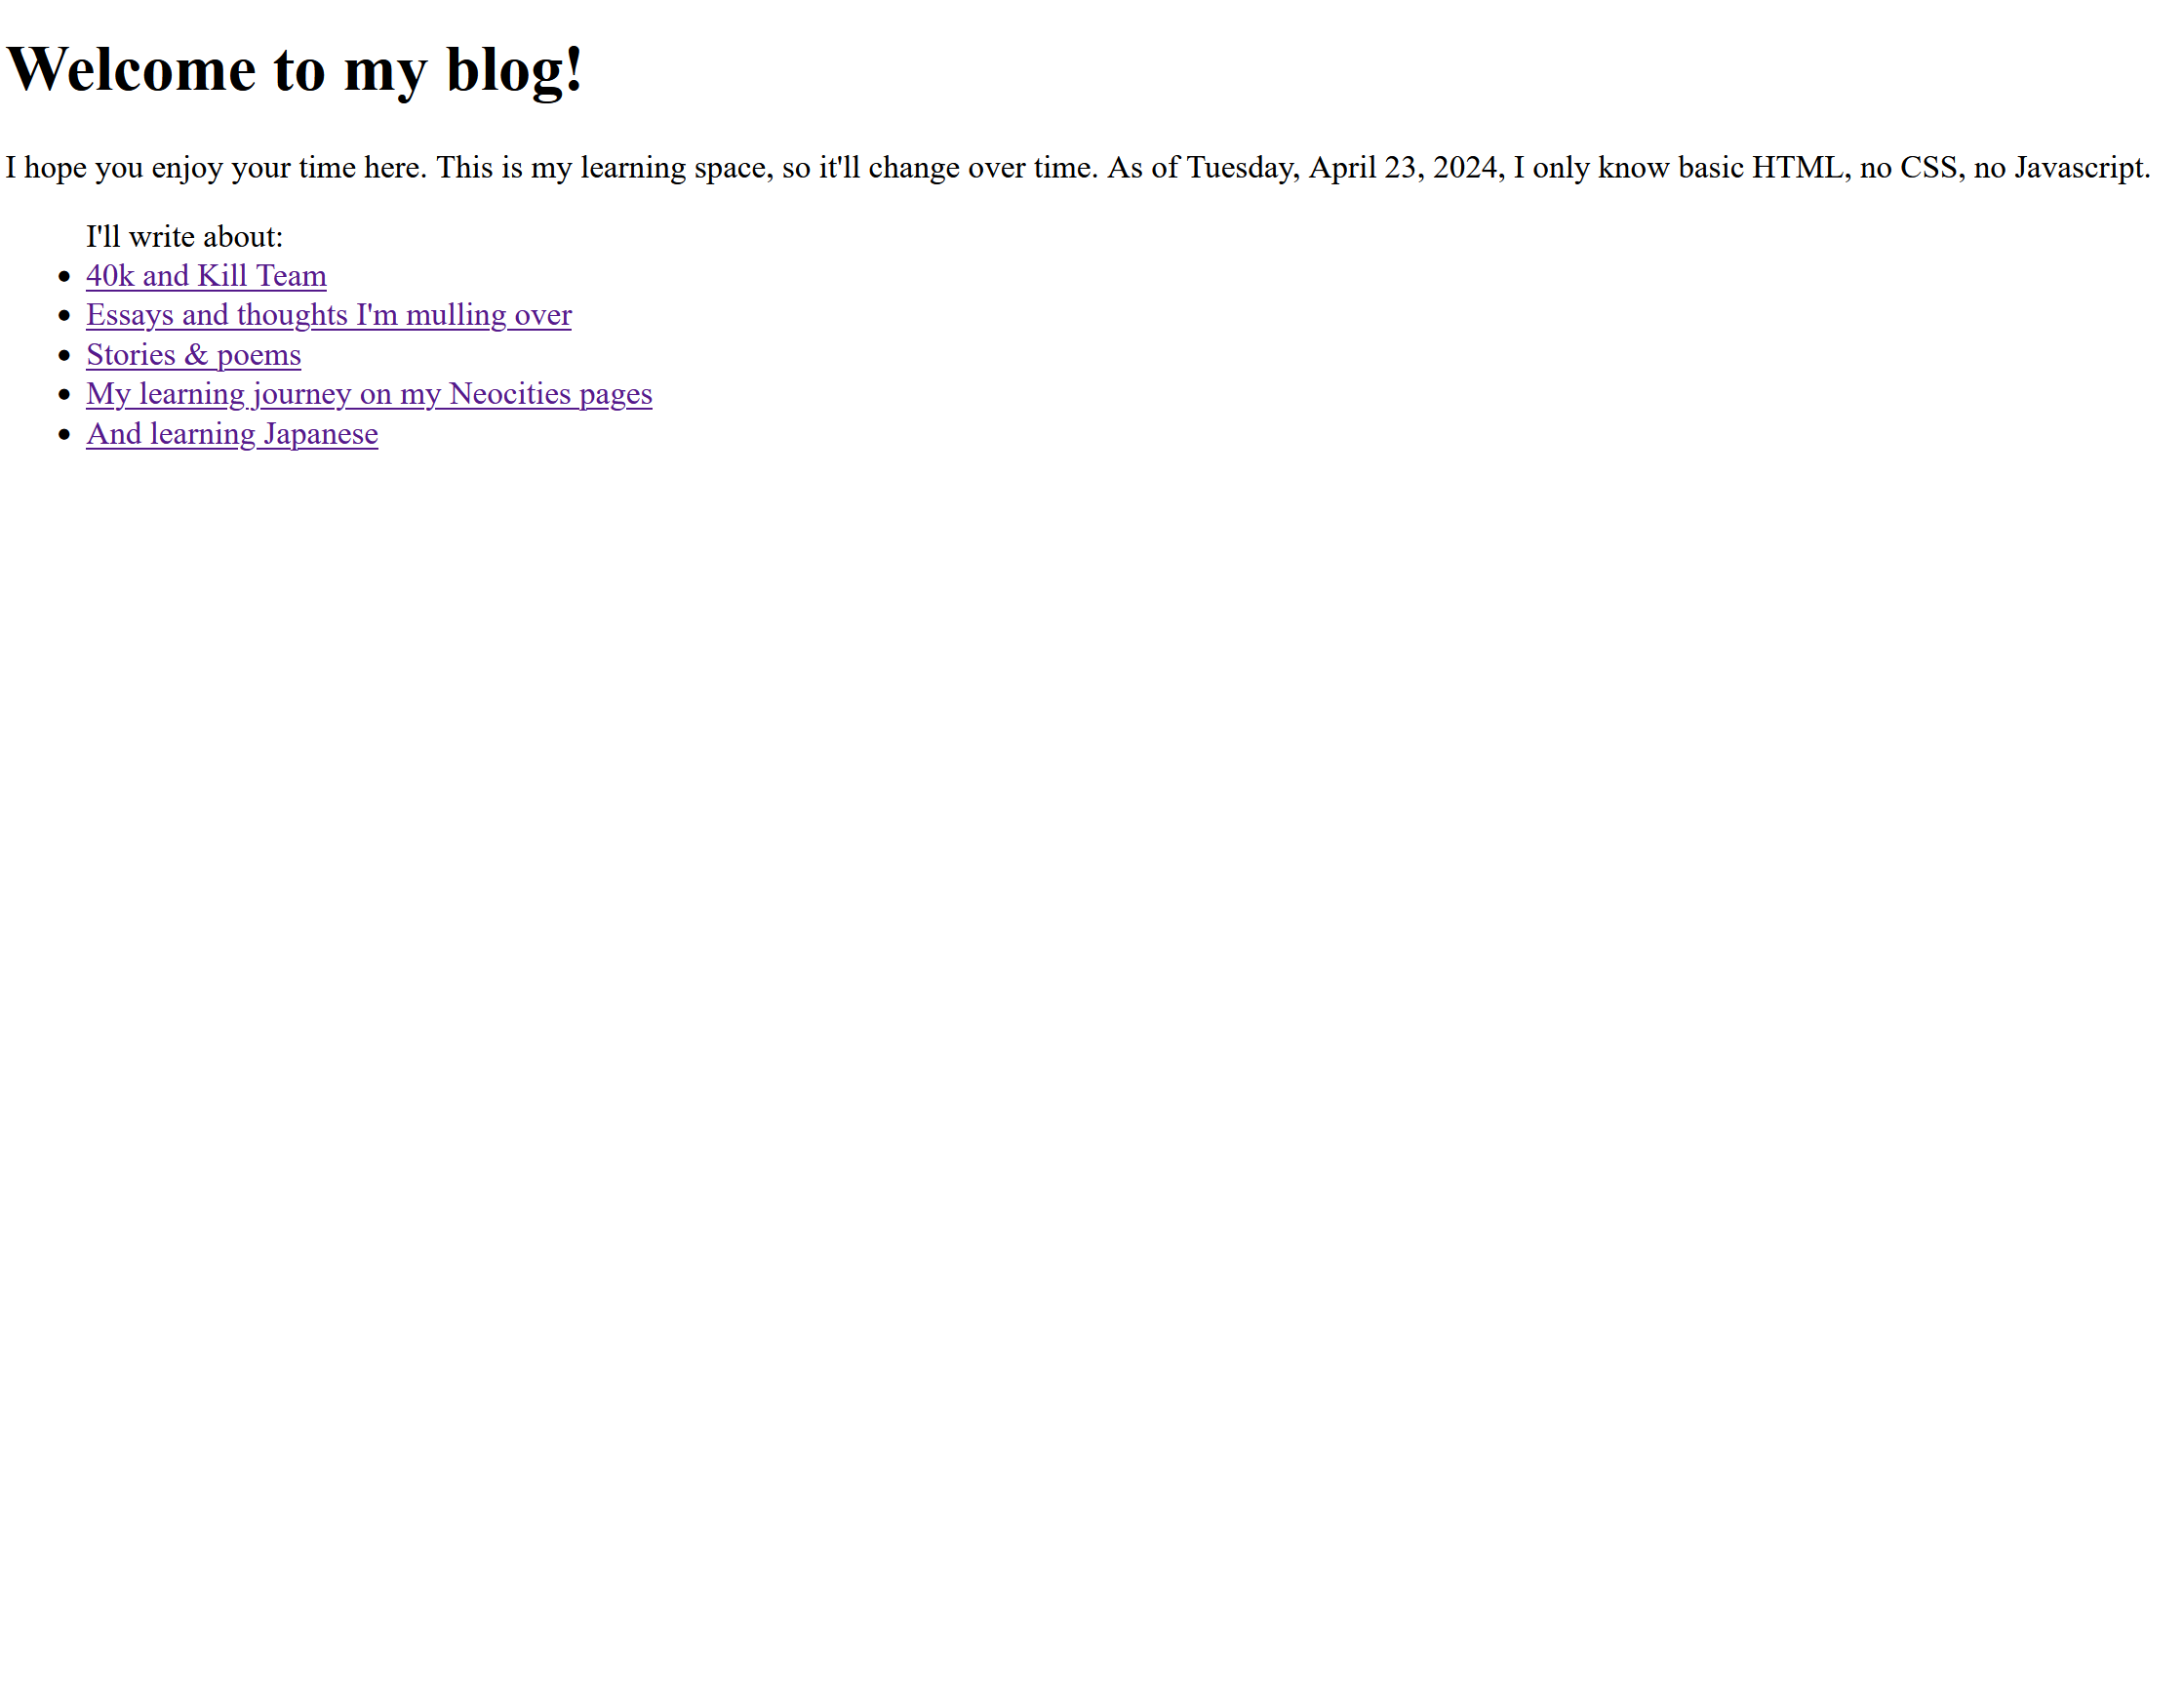 first picture of my homepage, only naked html